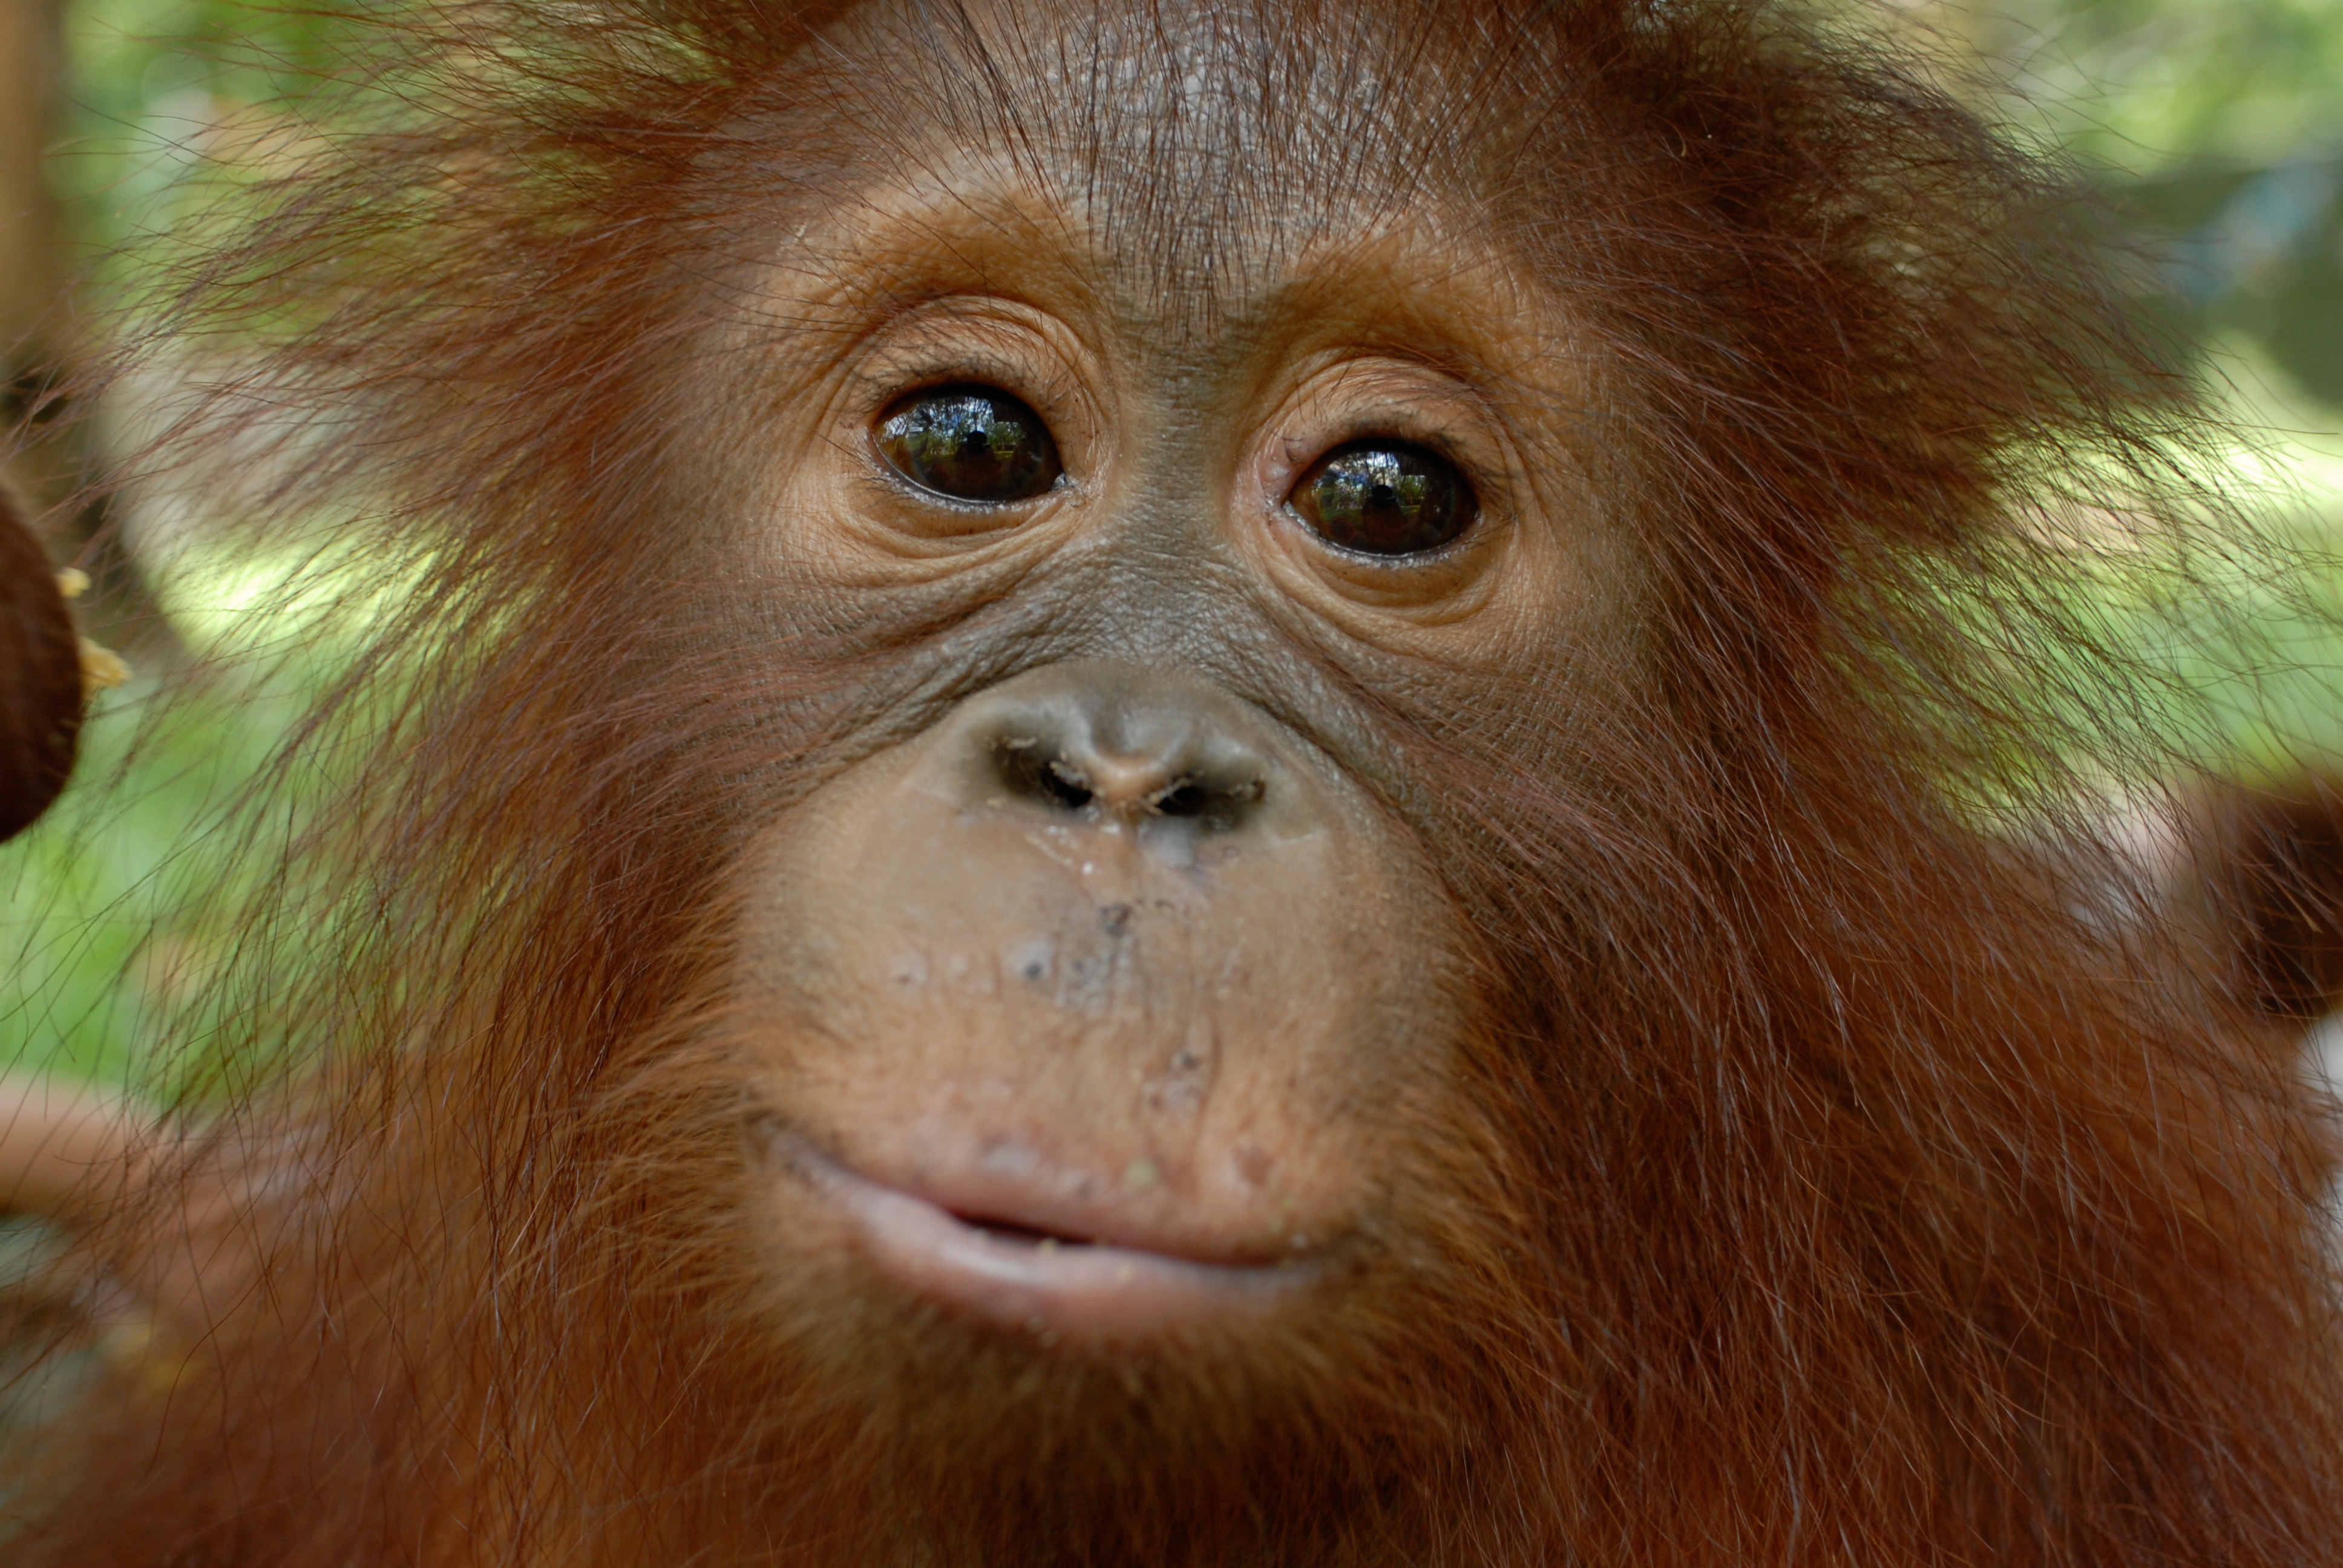 The orangutan ranks amongst our closest relatives and is perhaps the ultimate wildlife emblem of Southeast Asian forests.